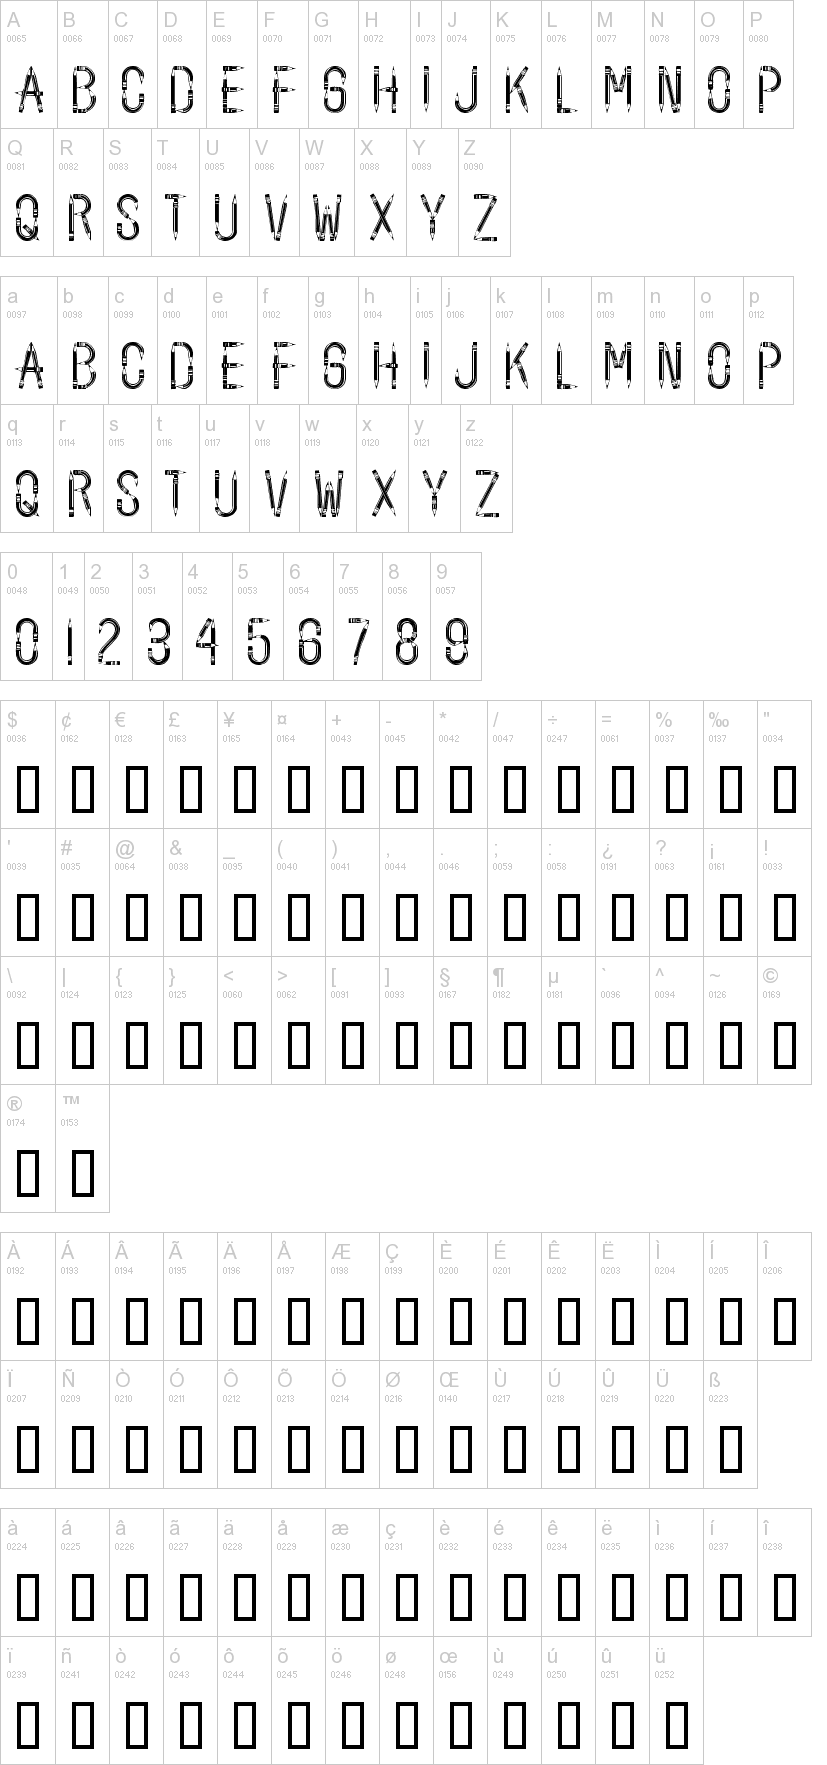 Back to School Font 